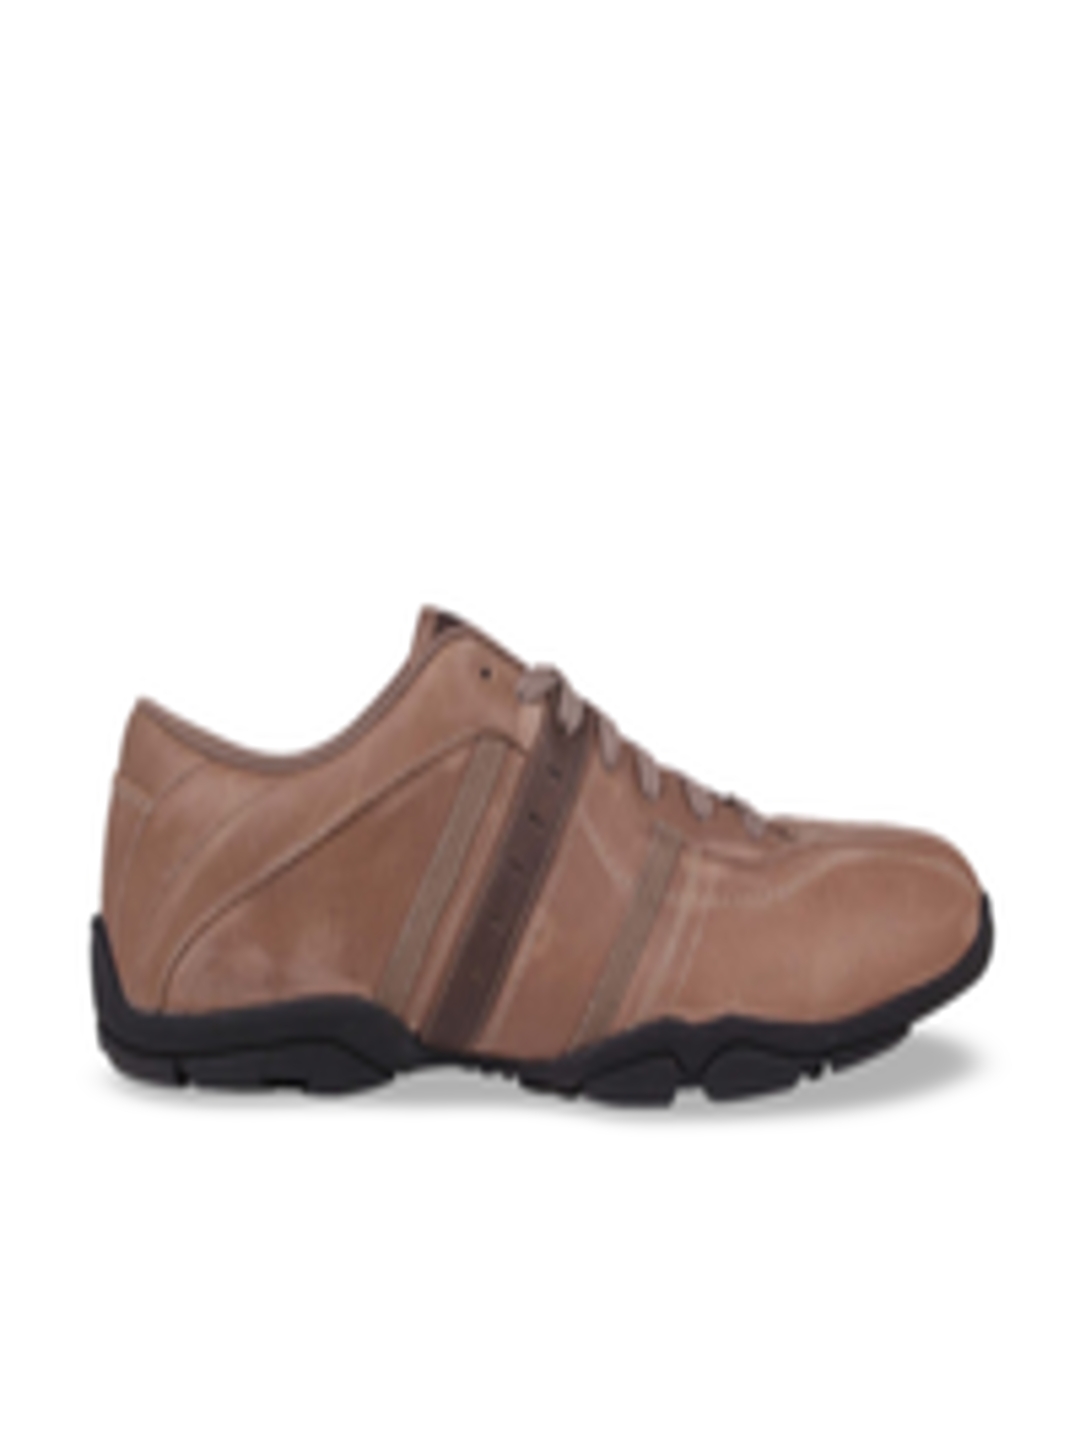 Buy Kangol Men Brown Leather Sneakers - Casual Shoes for Men 10185533